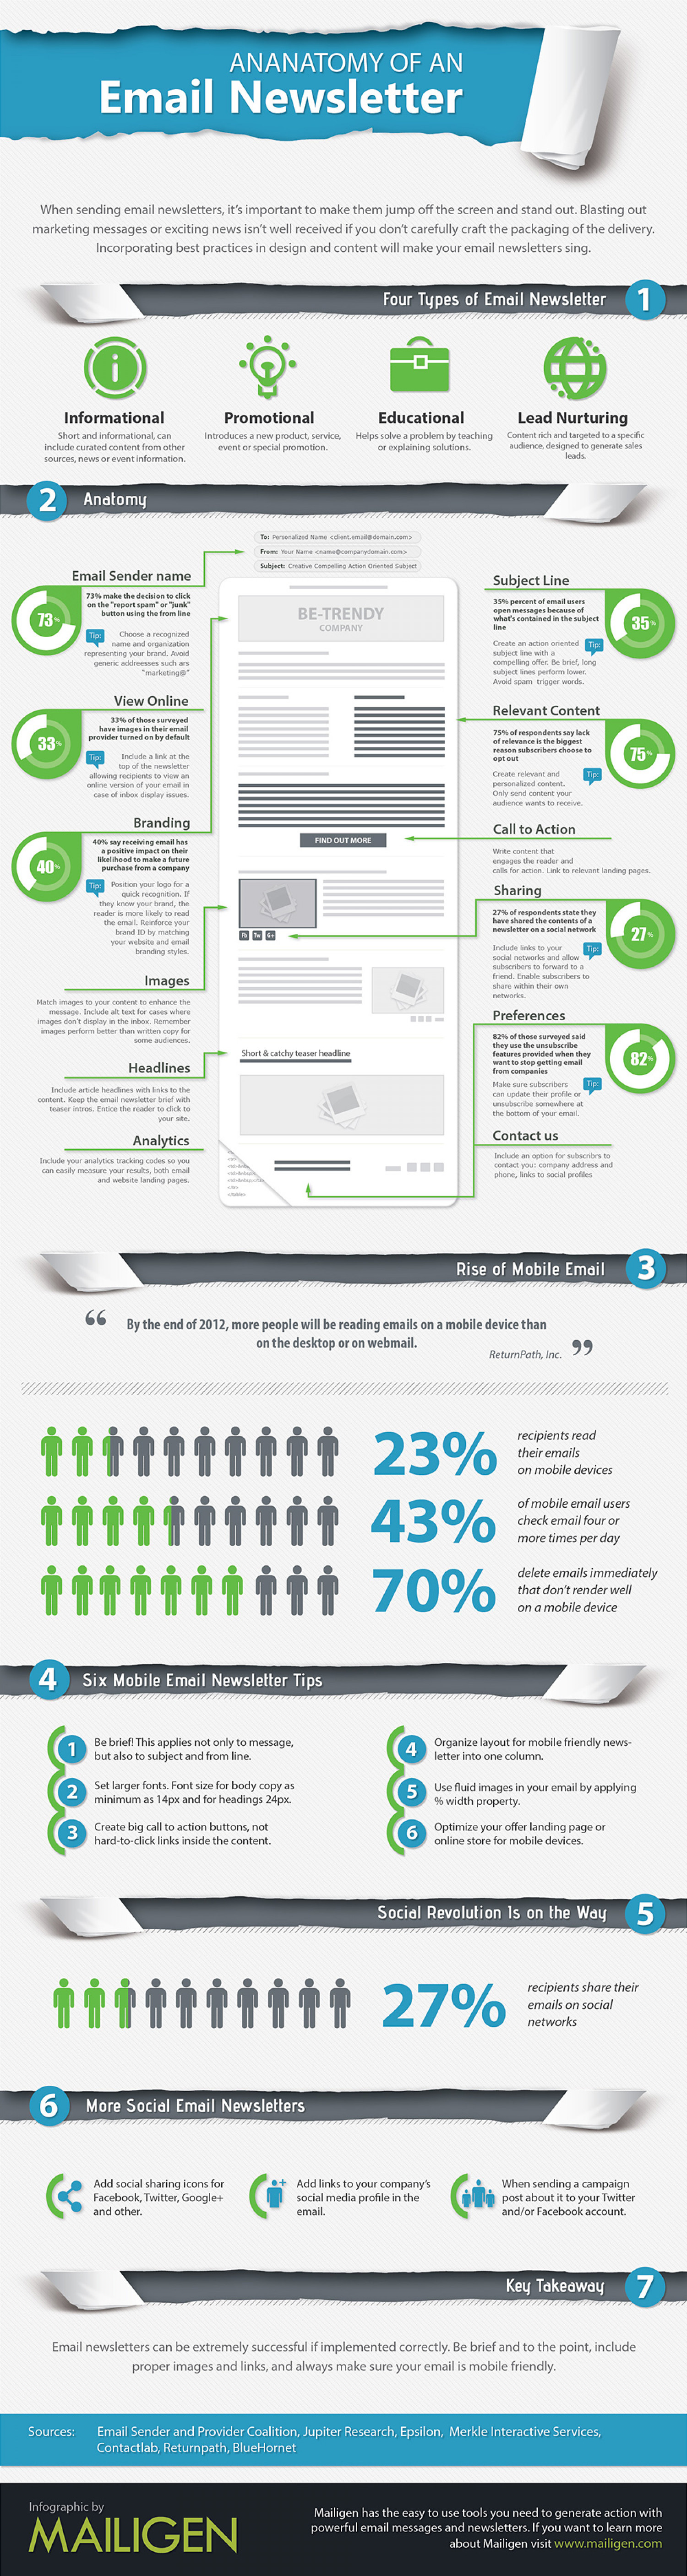 The Anatomy of An Email Newsletter: Is Your Email Ready to Send? Infographic